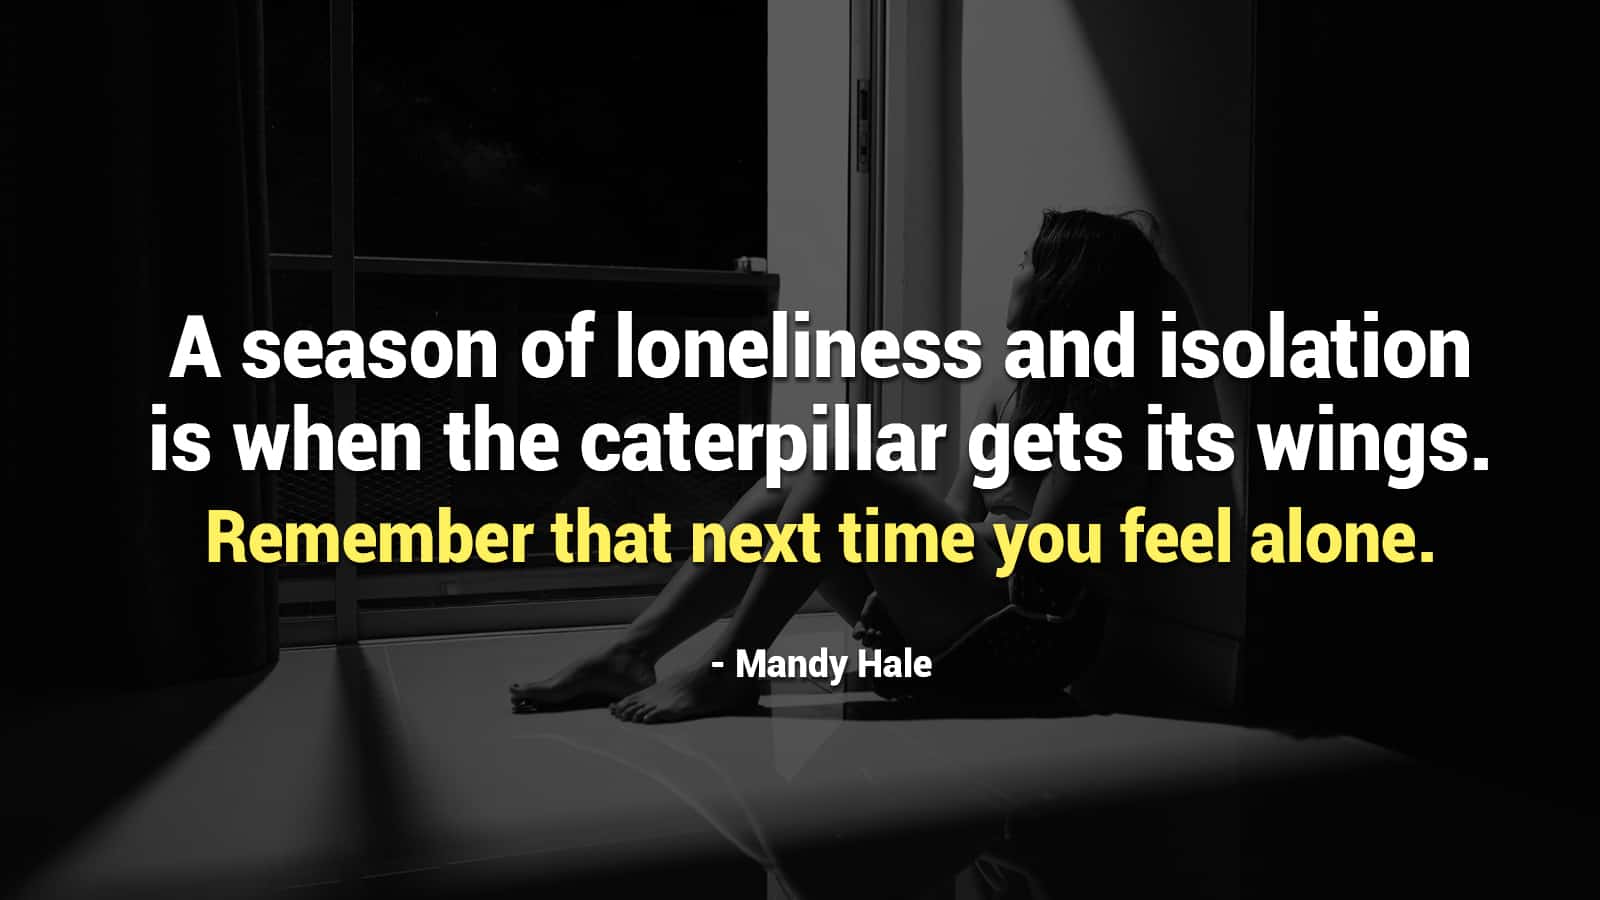 20 Quotes to Read Whenever You're Feeling Lonely